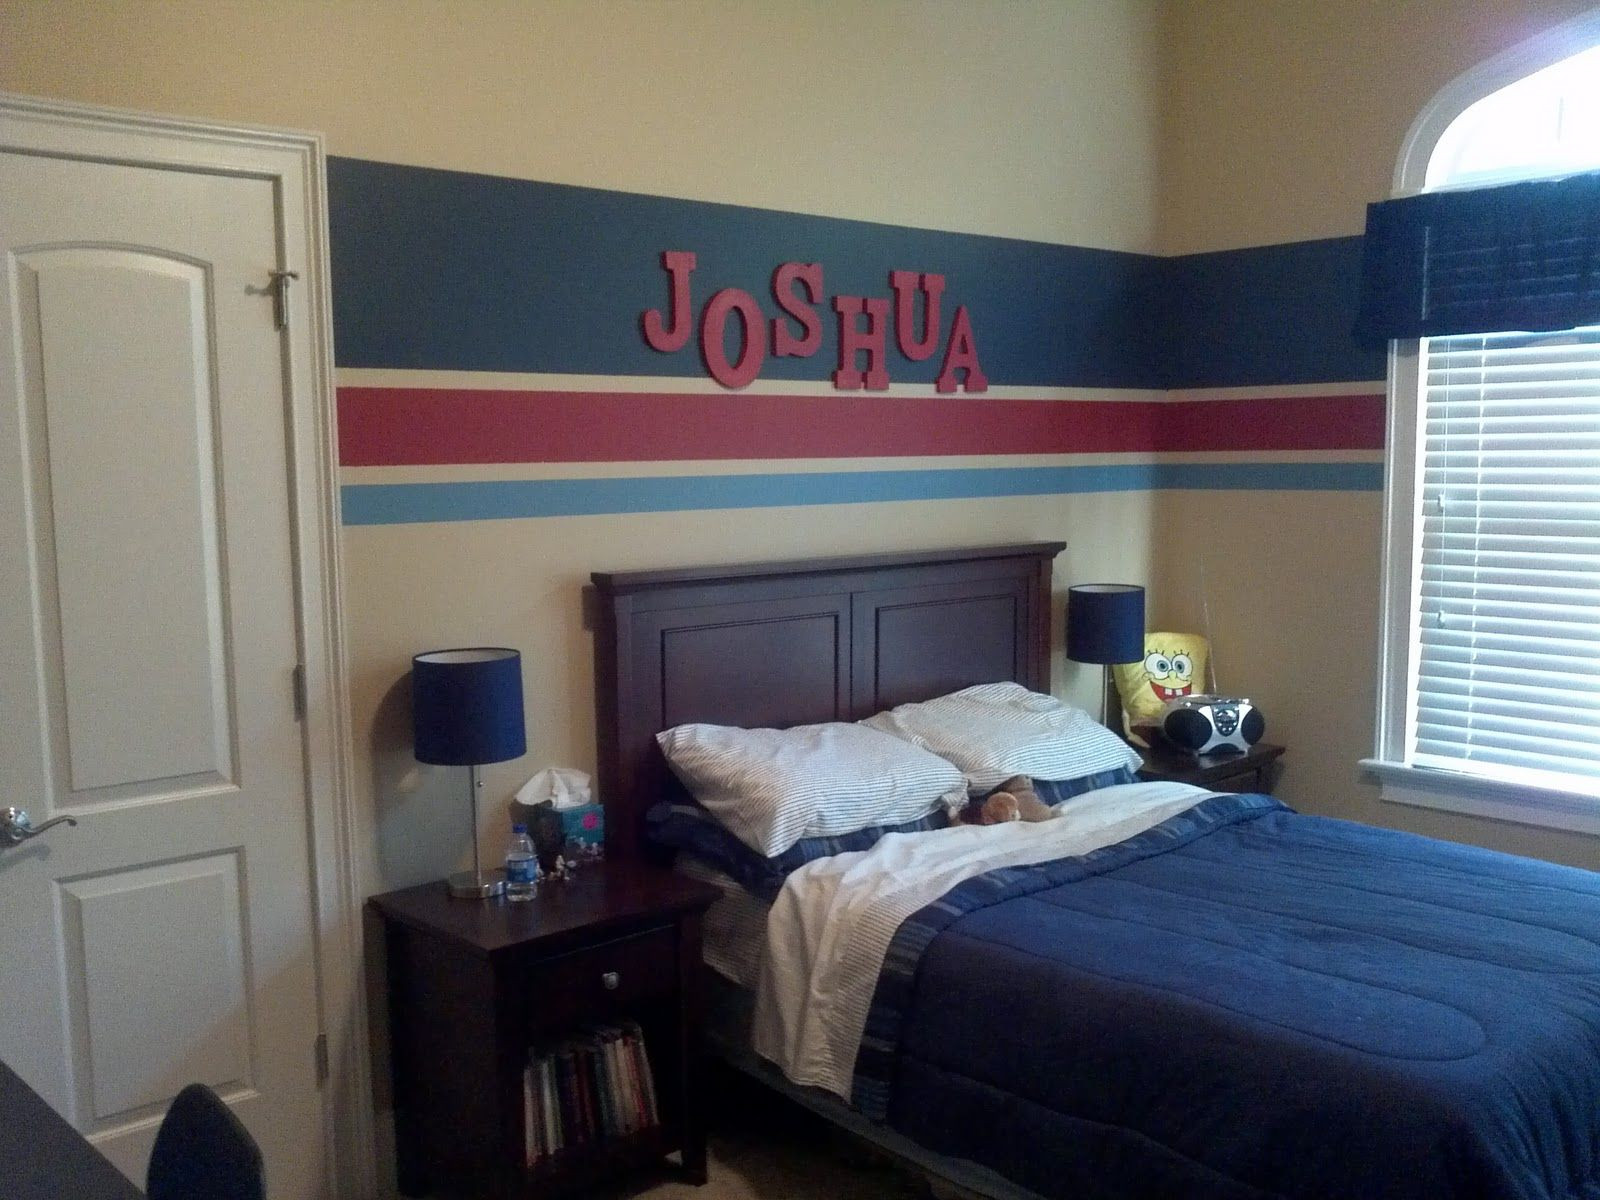 Painting Ideas For Boy Bedroom
 Eat Sleep Decorate Striped Walls Boys Bedroom FINISHED